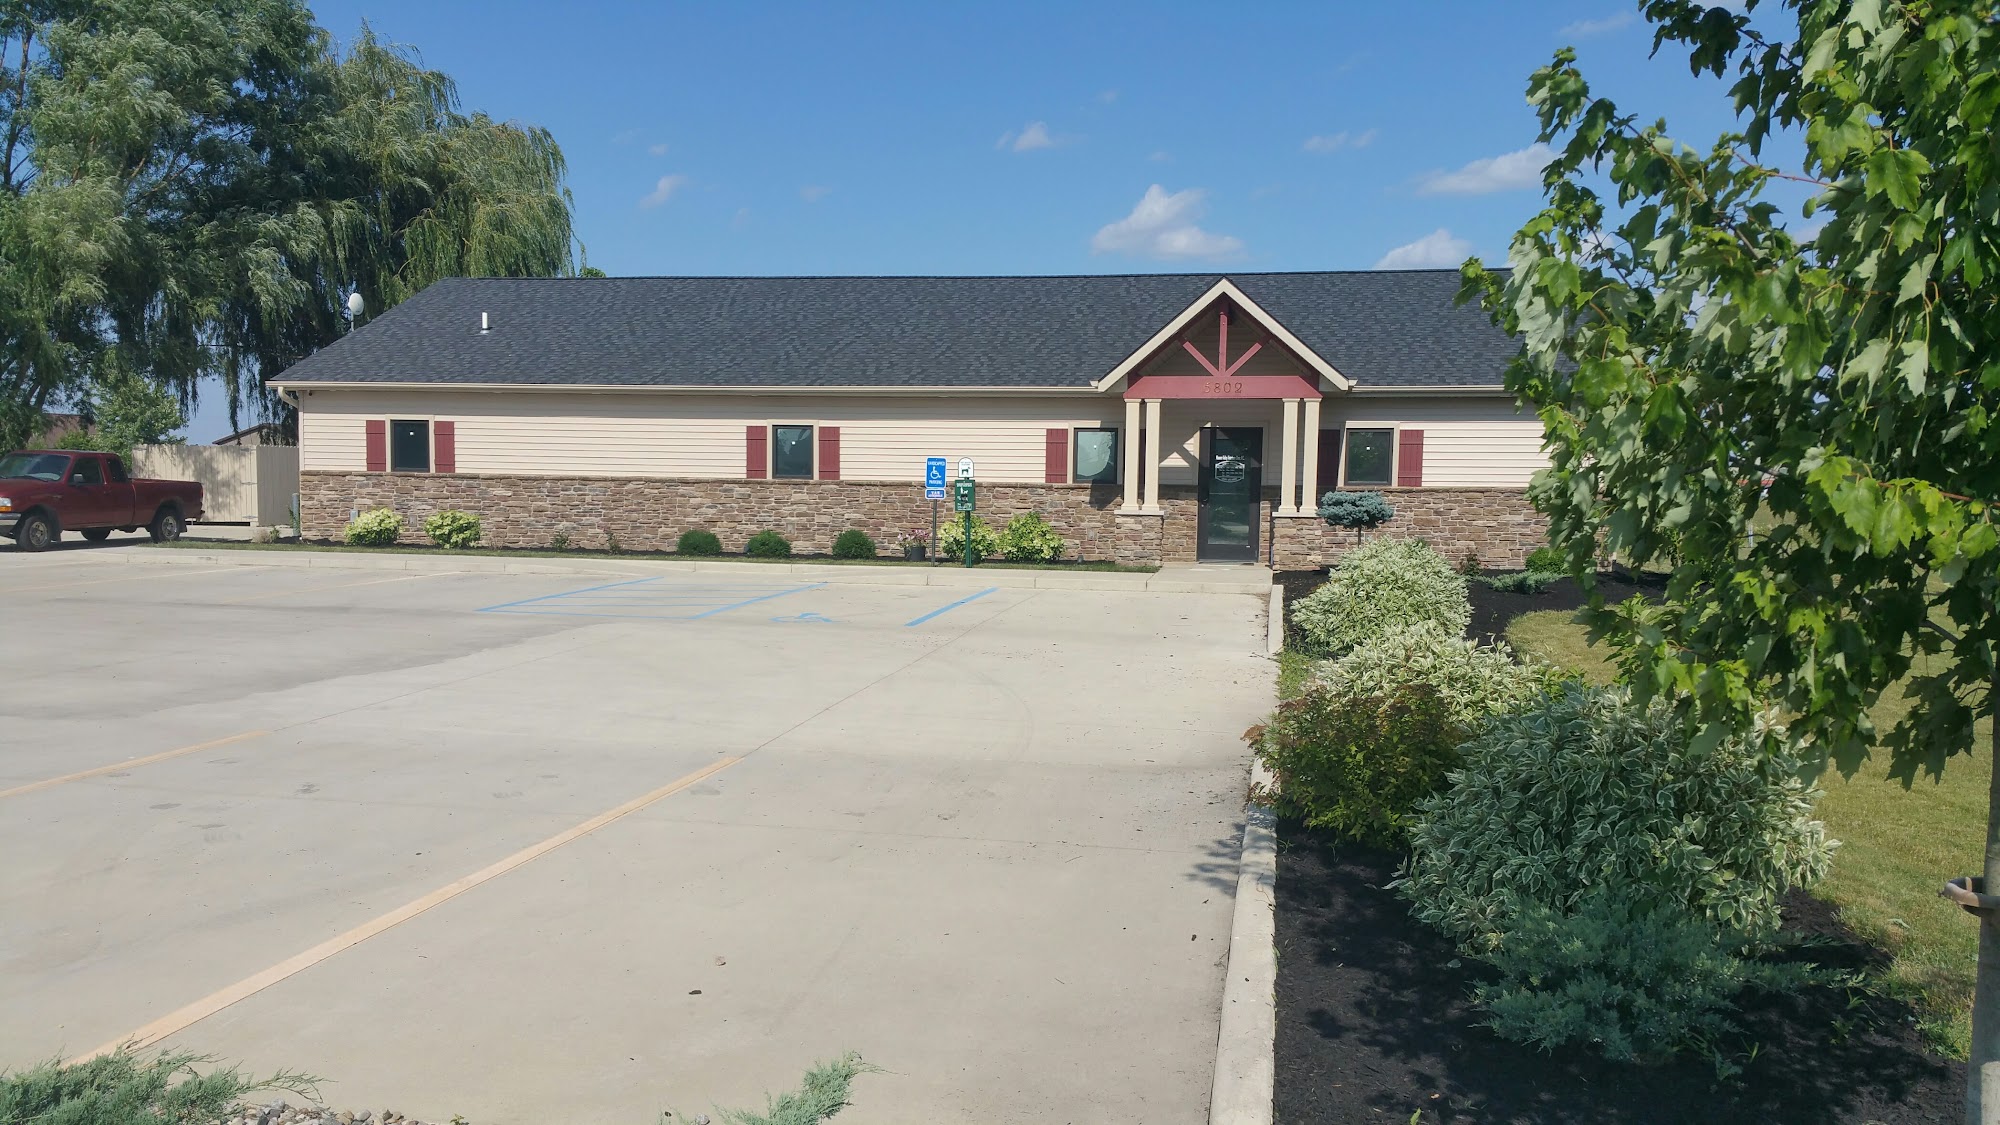 Maumee Valley Veterinary Clinic